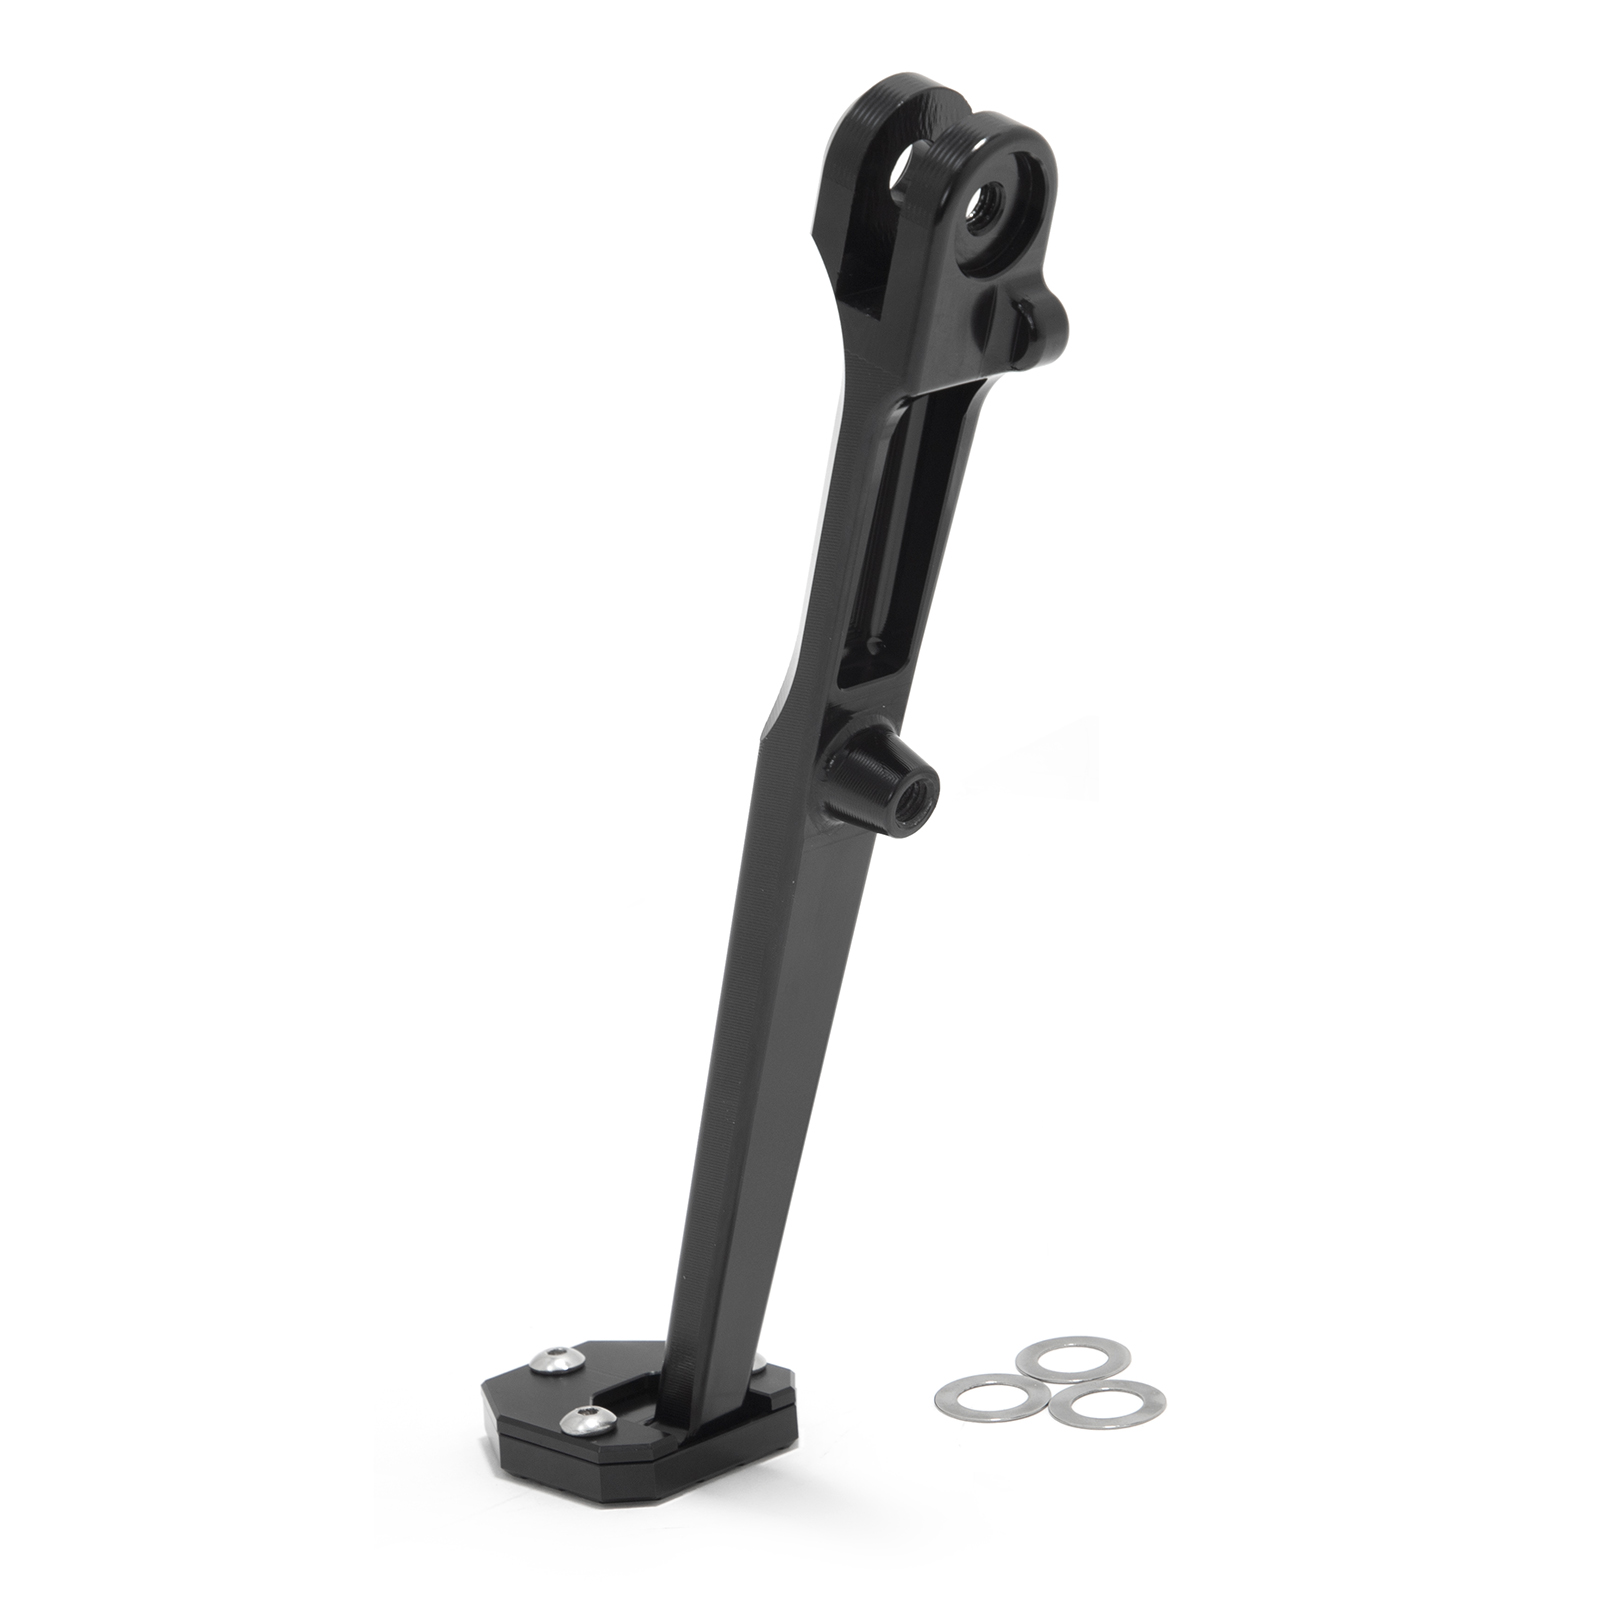 Dirt eBike Side Stand Kickstand for Sur Ron Light Bee / Segway X160 & X260 / Talaria Sting